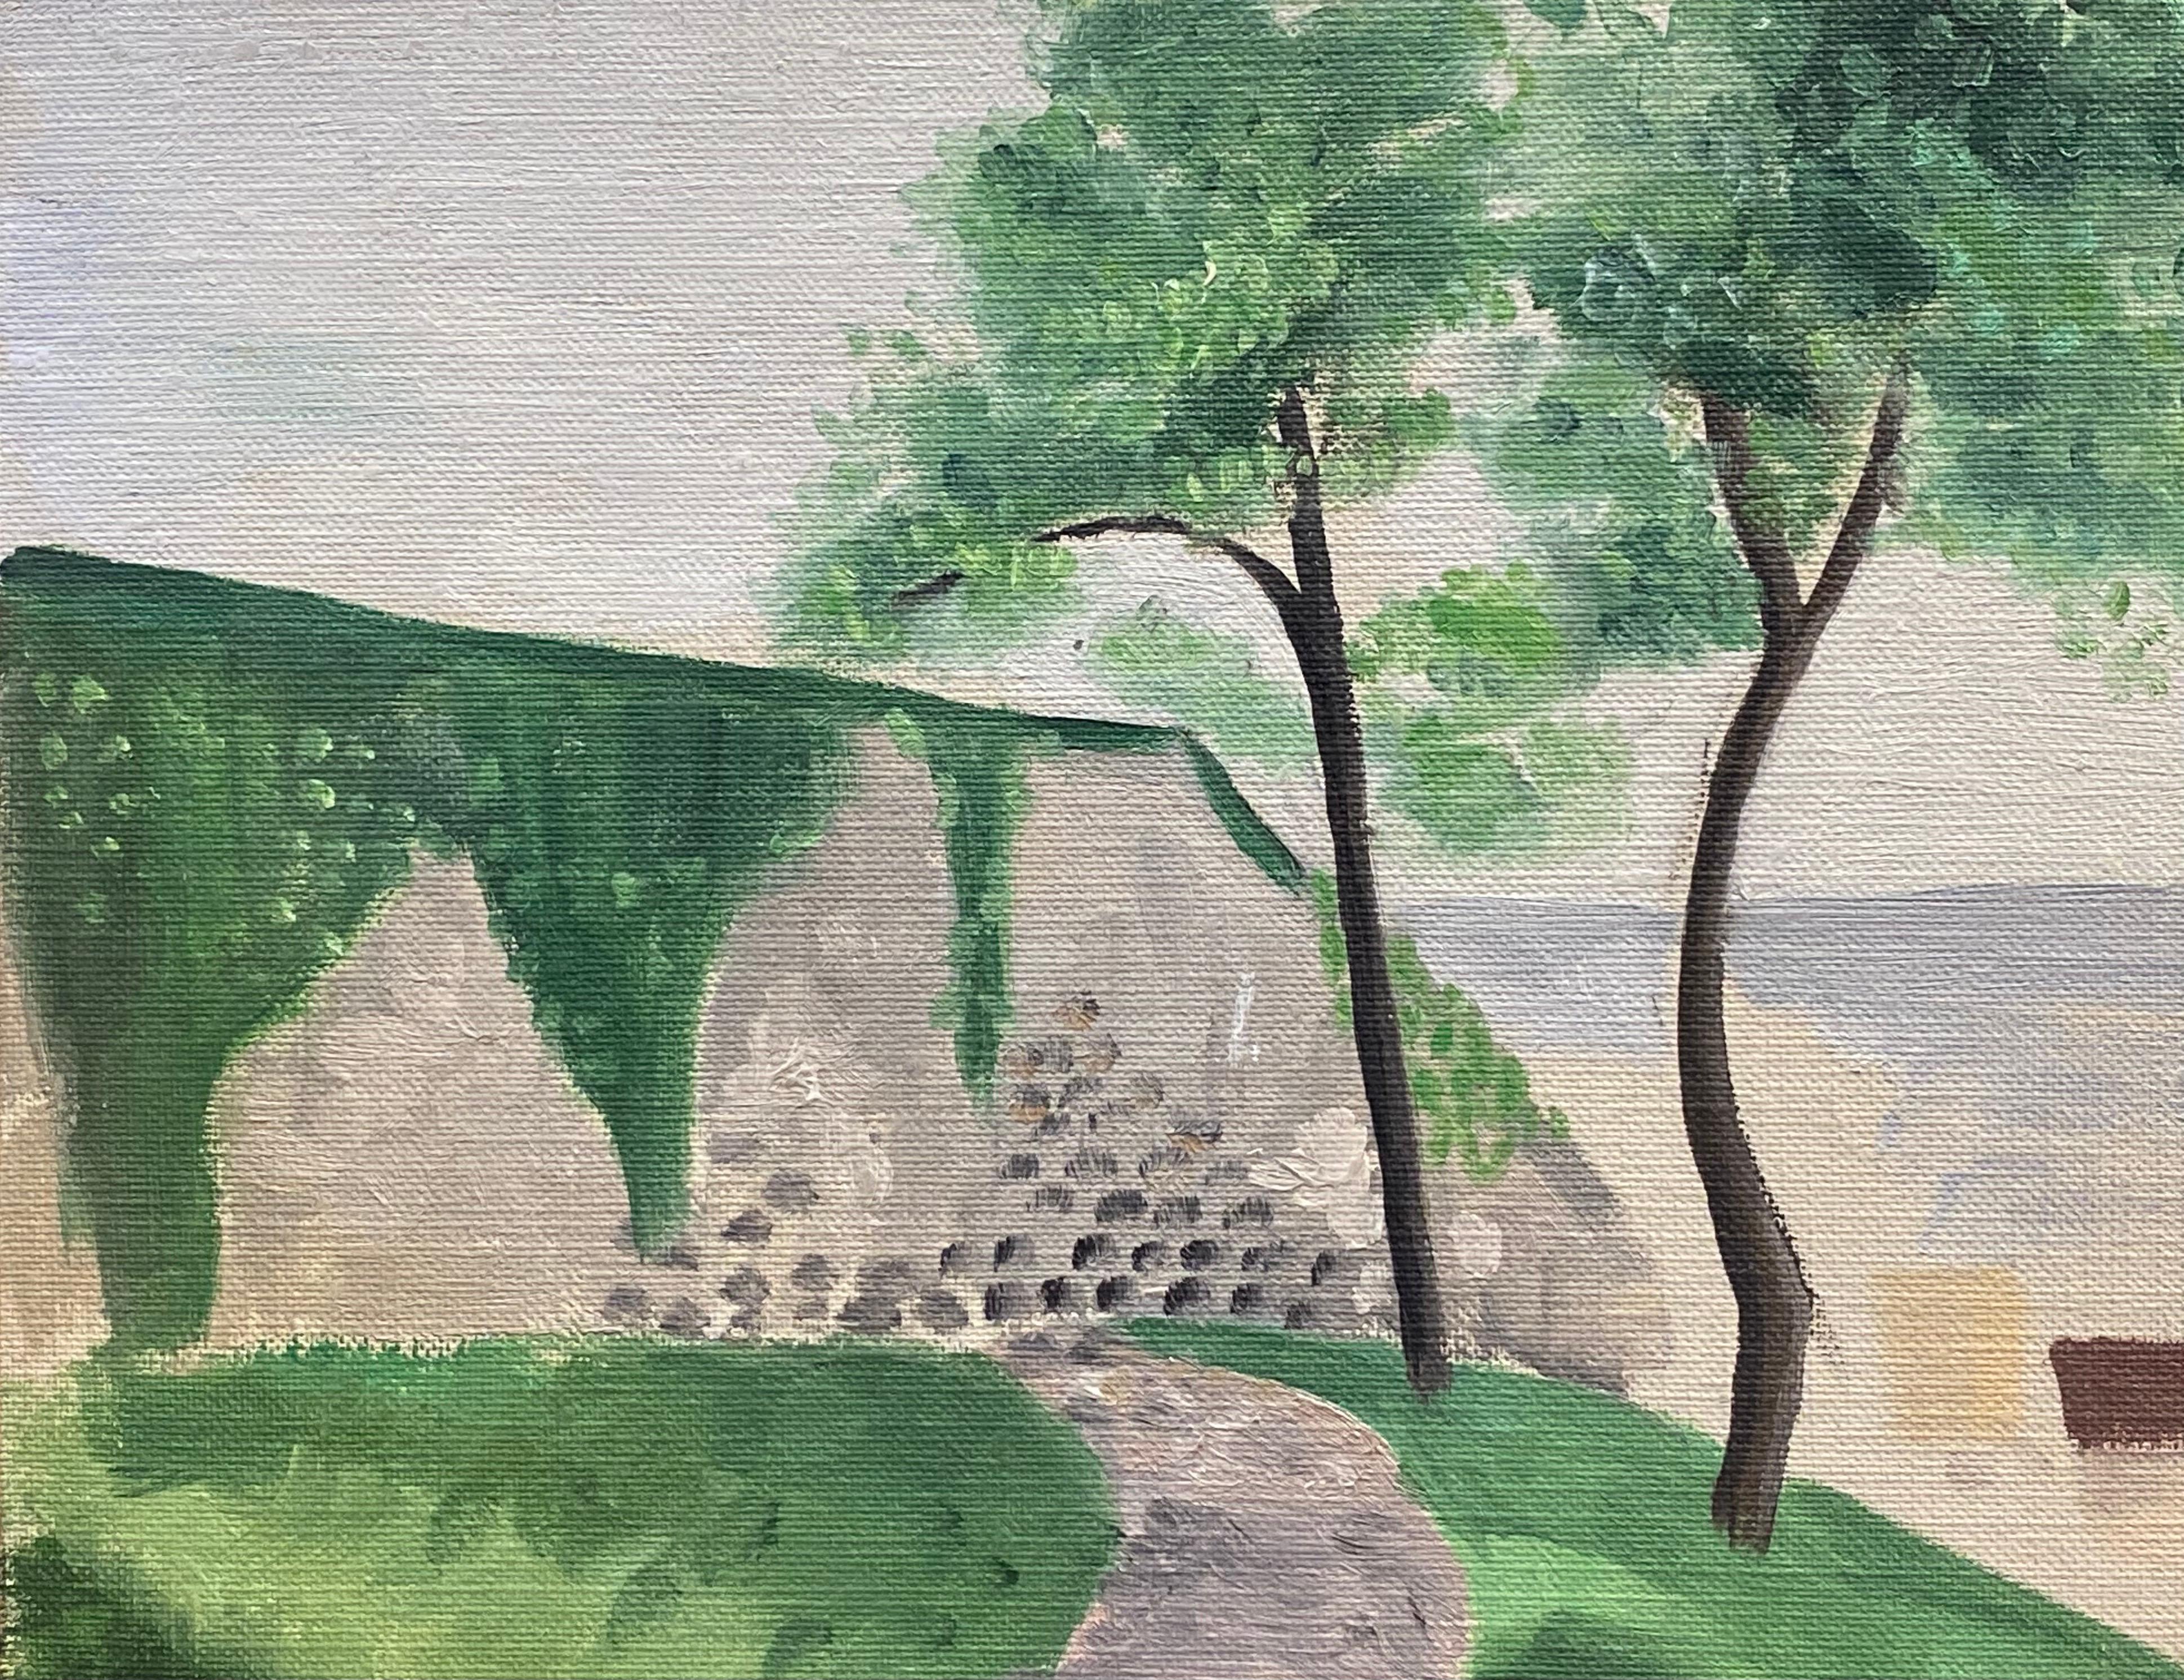 Landscape
by Geneviève Zondervan (French 1922-2013)
oil painting on board

board: 9 x 10.5 inches

Superb mid-century oil painting on board by the French artist, Geneviève Zondervan (French 1922-2013). The painting has excellent provenance, having